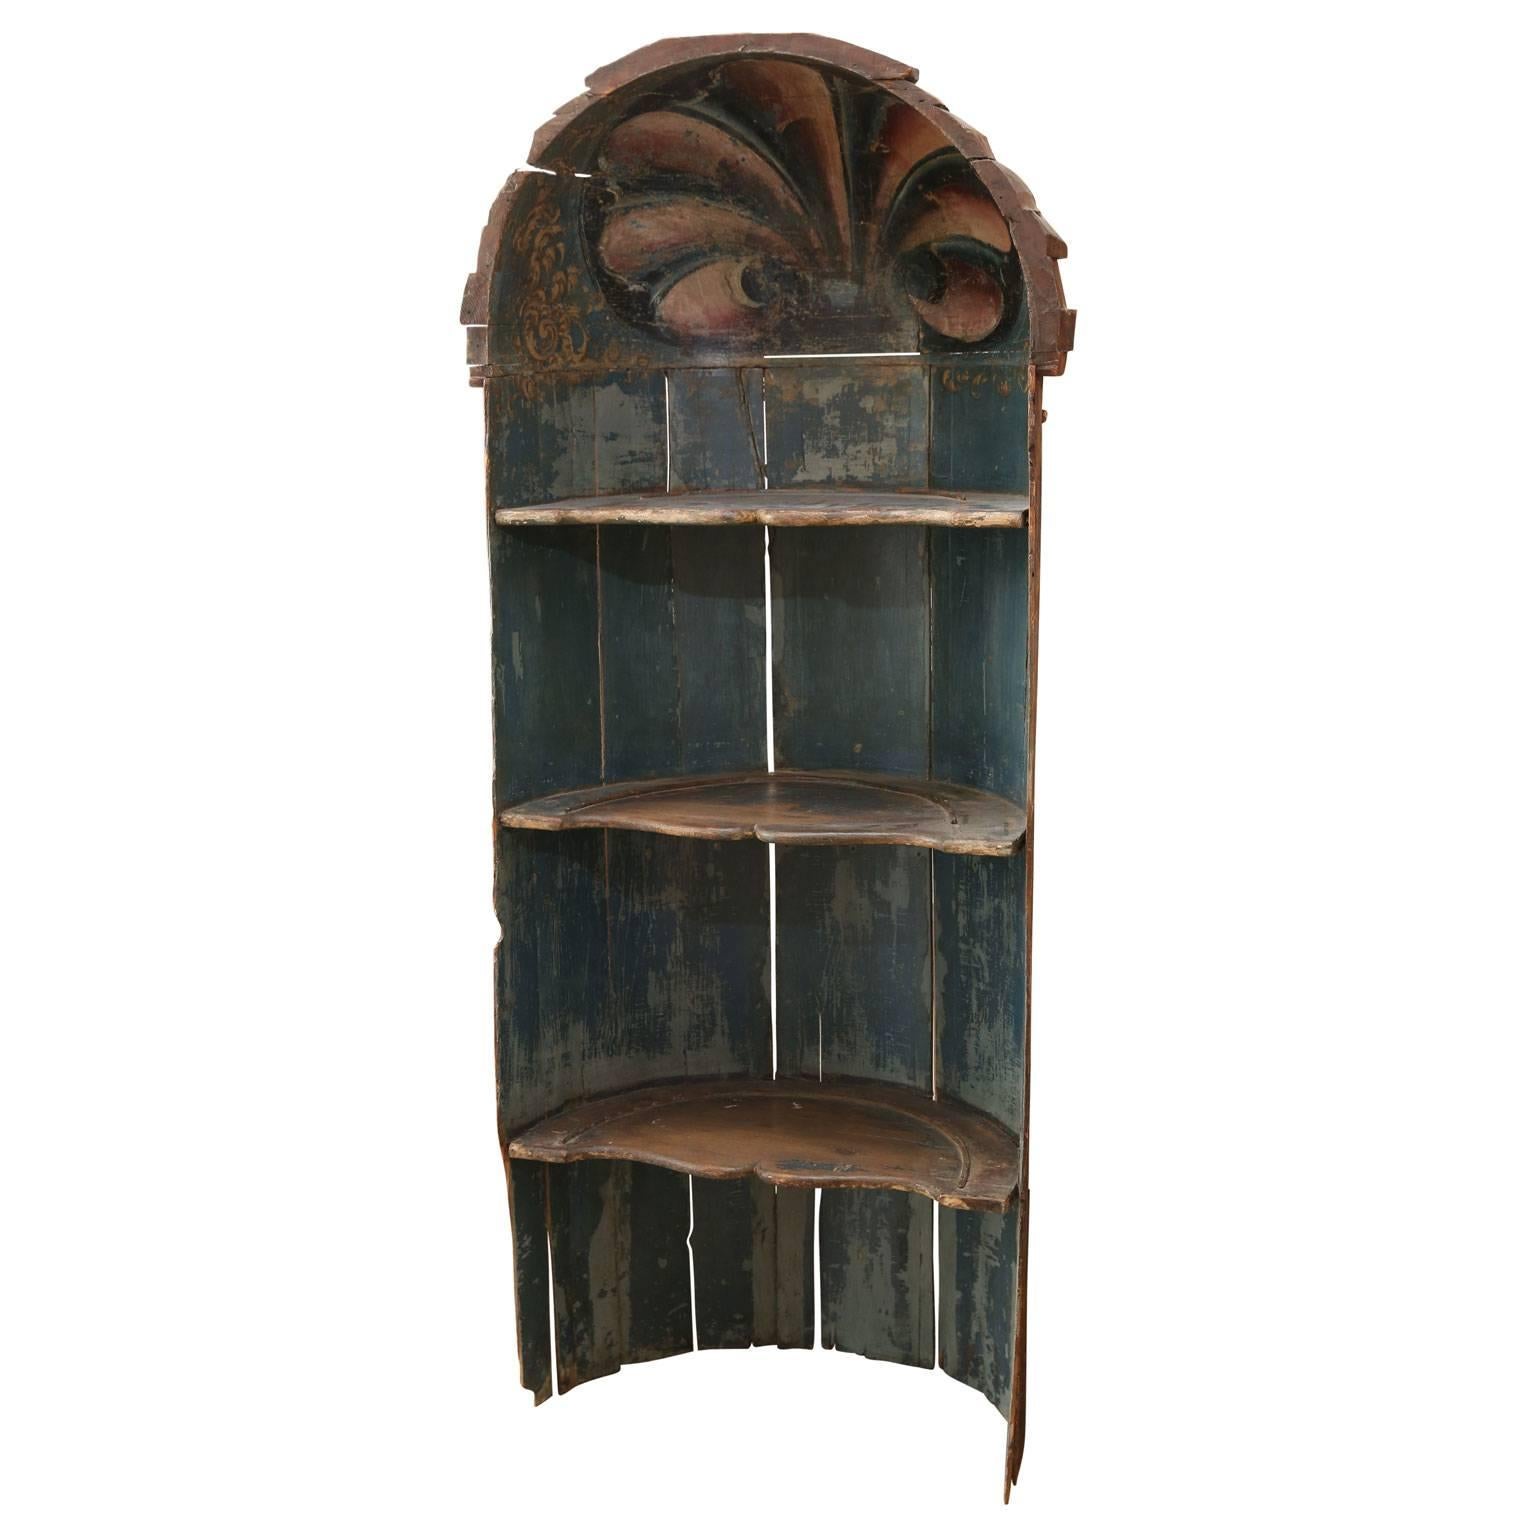 Baroque period cupboard niche painted in dark blue with secondary colors of gold, violet and pink. Dates early to mid-18th century and features built-in open domed cupboard. Dutch or French in origin with a marvelous sculptural quality. Interior